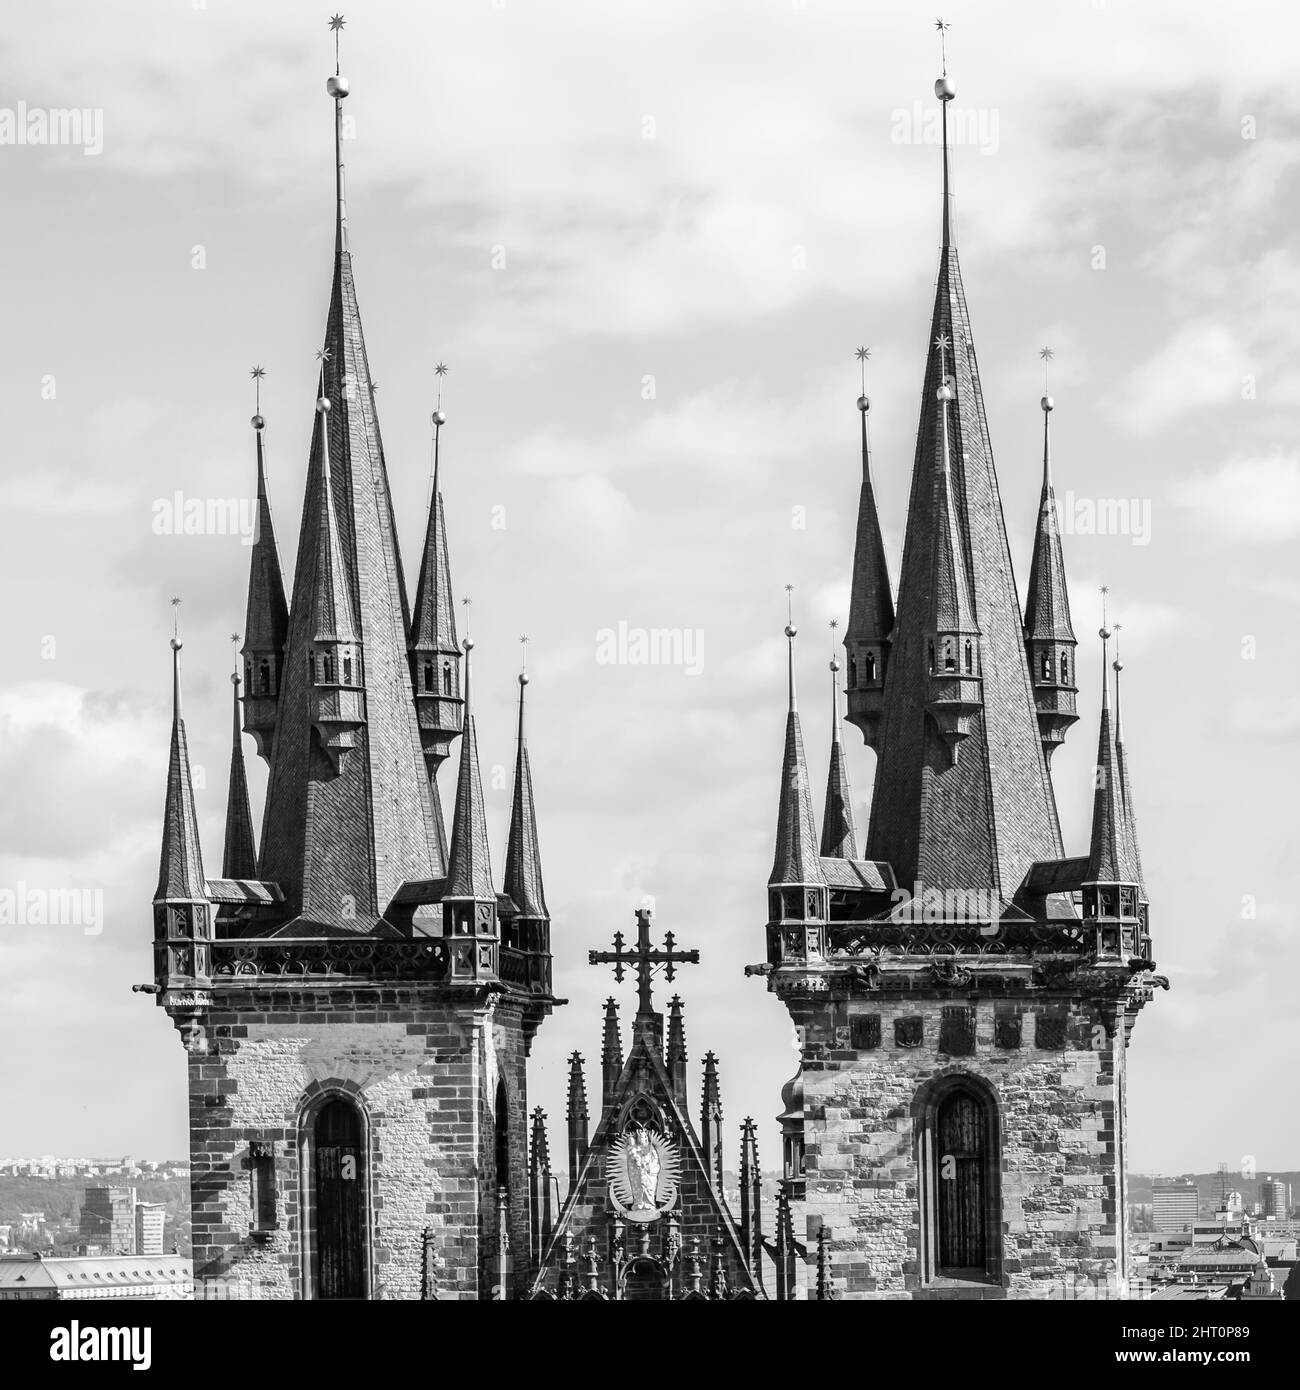 Gothic spires of Tyn Church in Prague, Czechia. Black and white photography, architectural detail Stock Photo